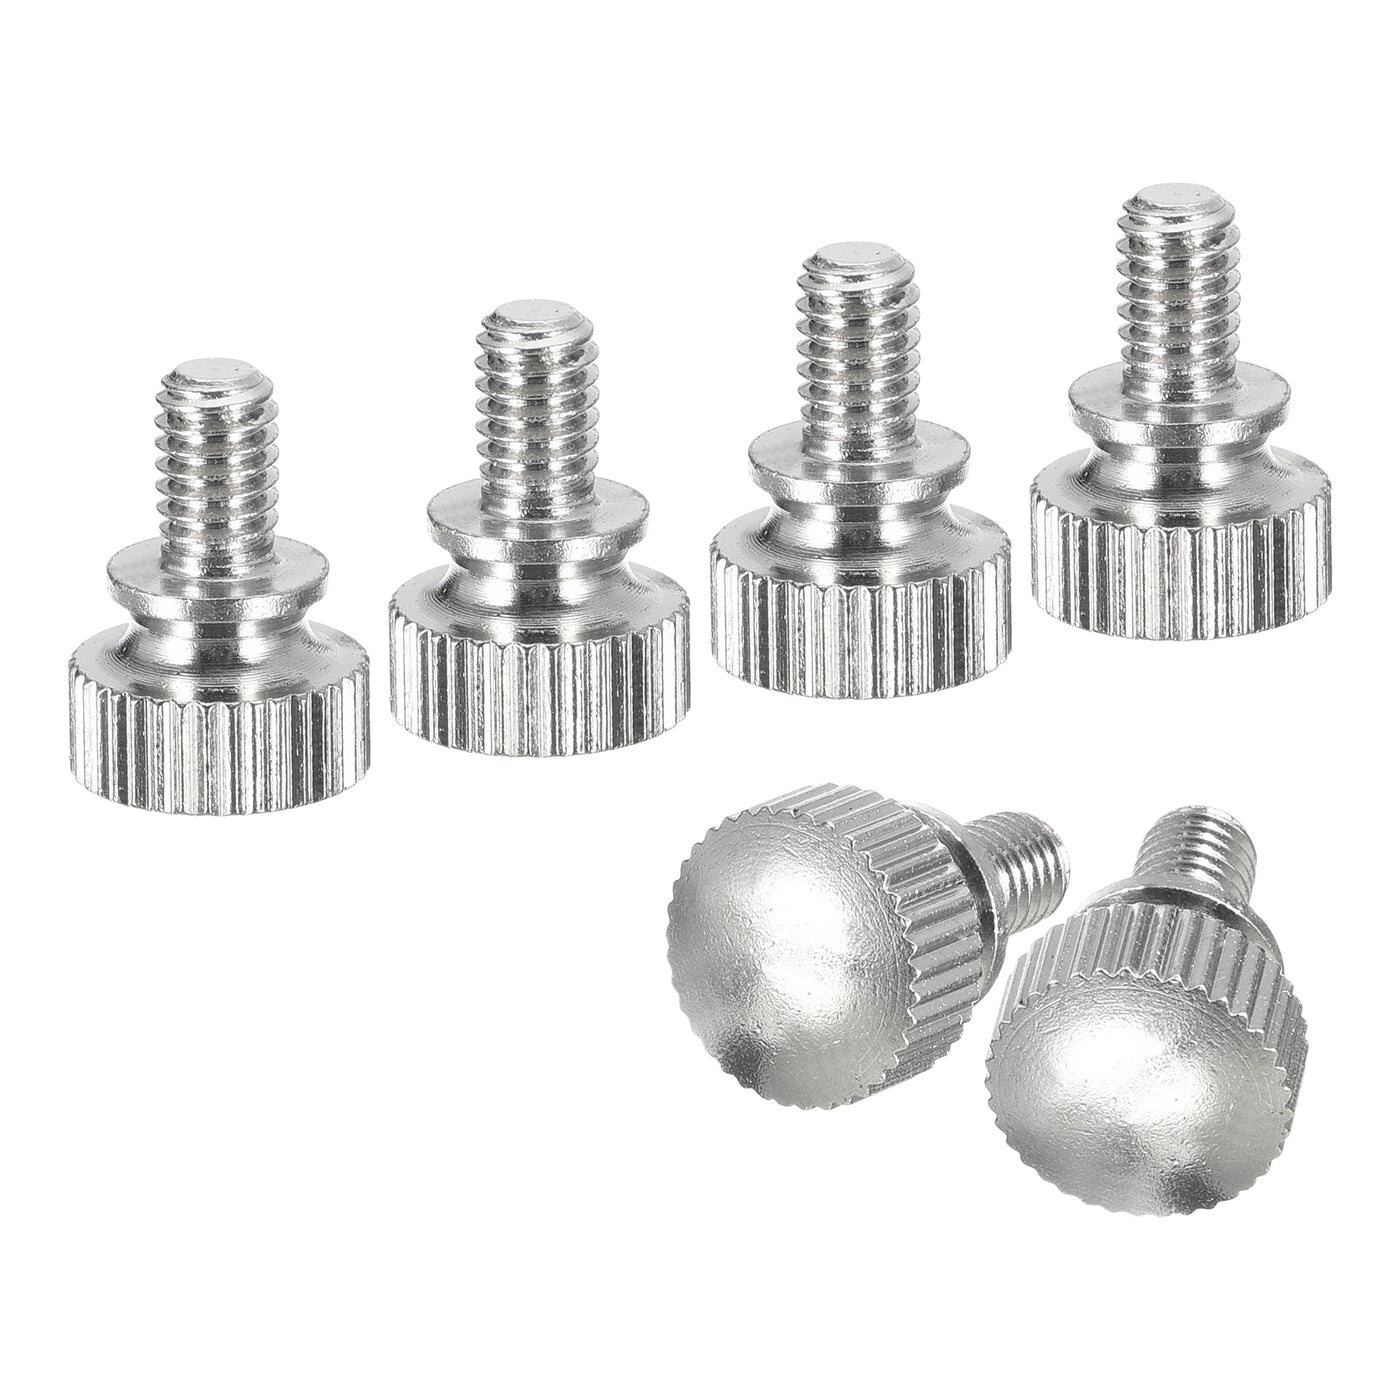 uxcell Uxcell M4x6mm Knurled Thumb Screws, 6pcs Brass Thumb Screws with Shoulder, Silver Tone